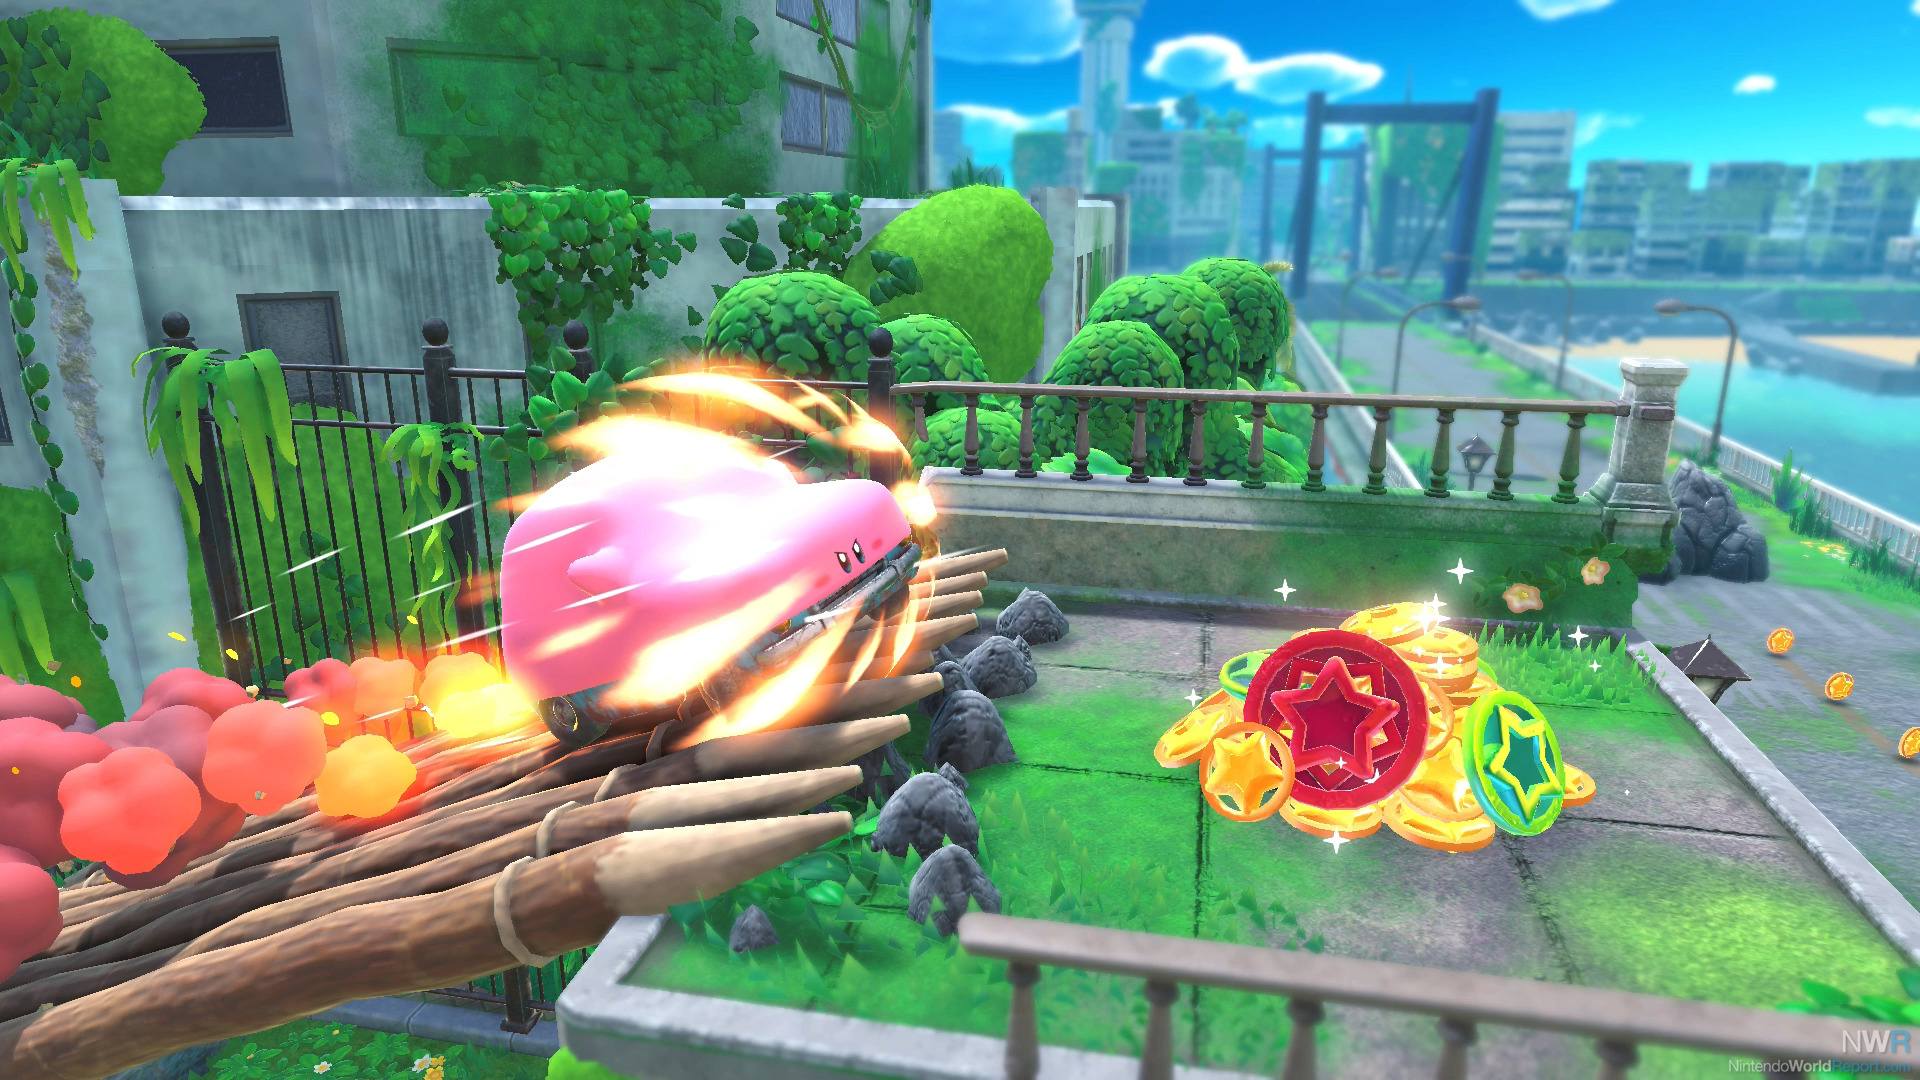 Kirby And The Forgotten Land Launches March 25 With Co-Op Play